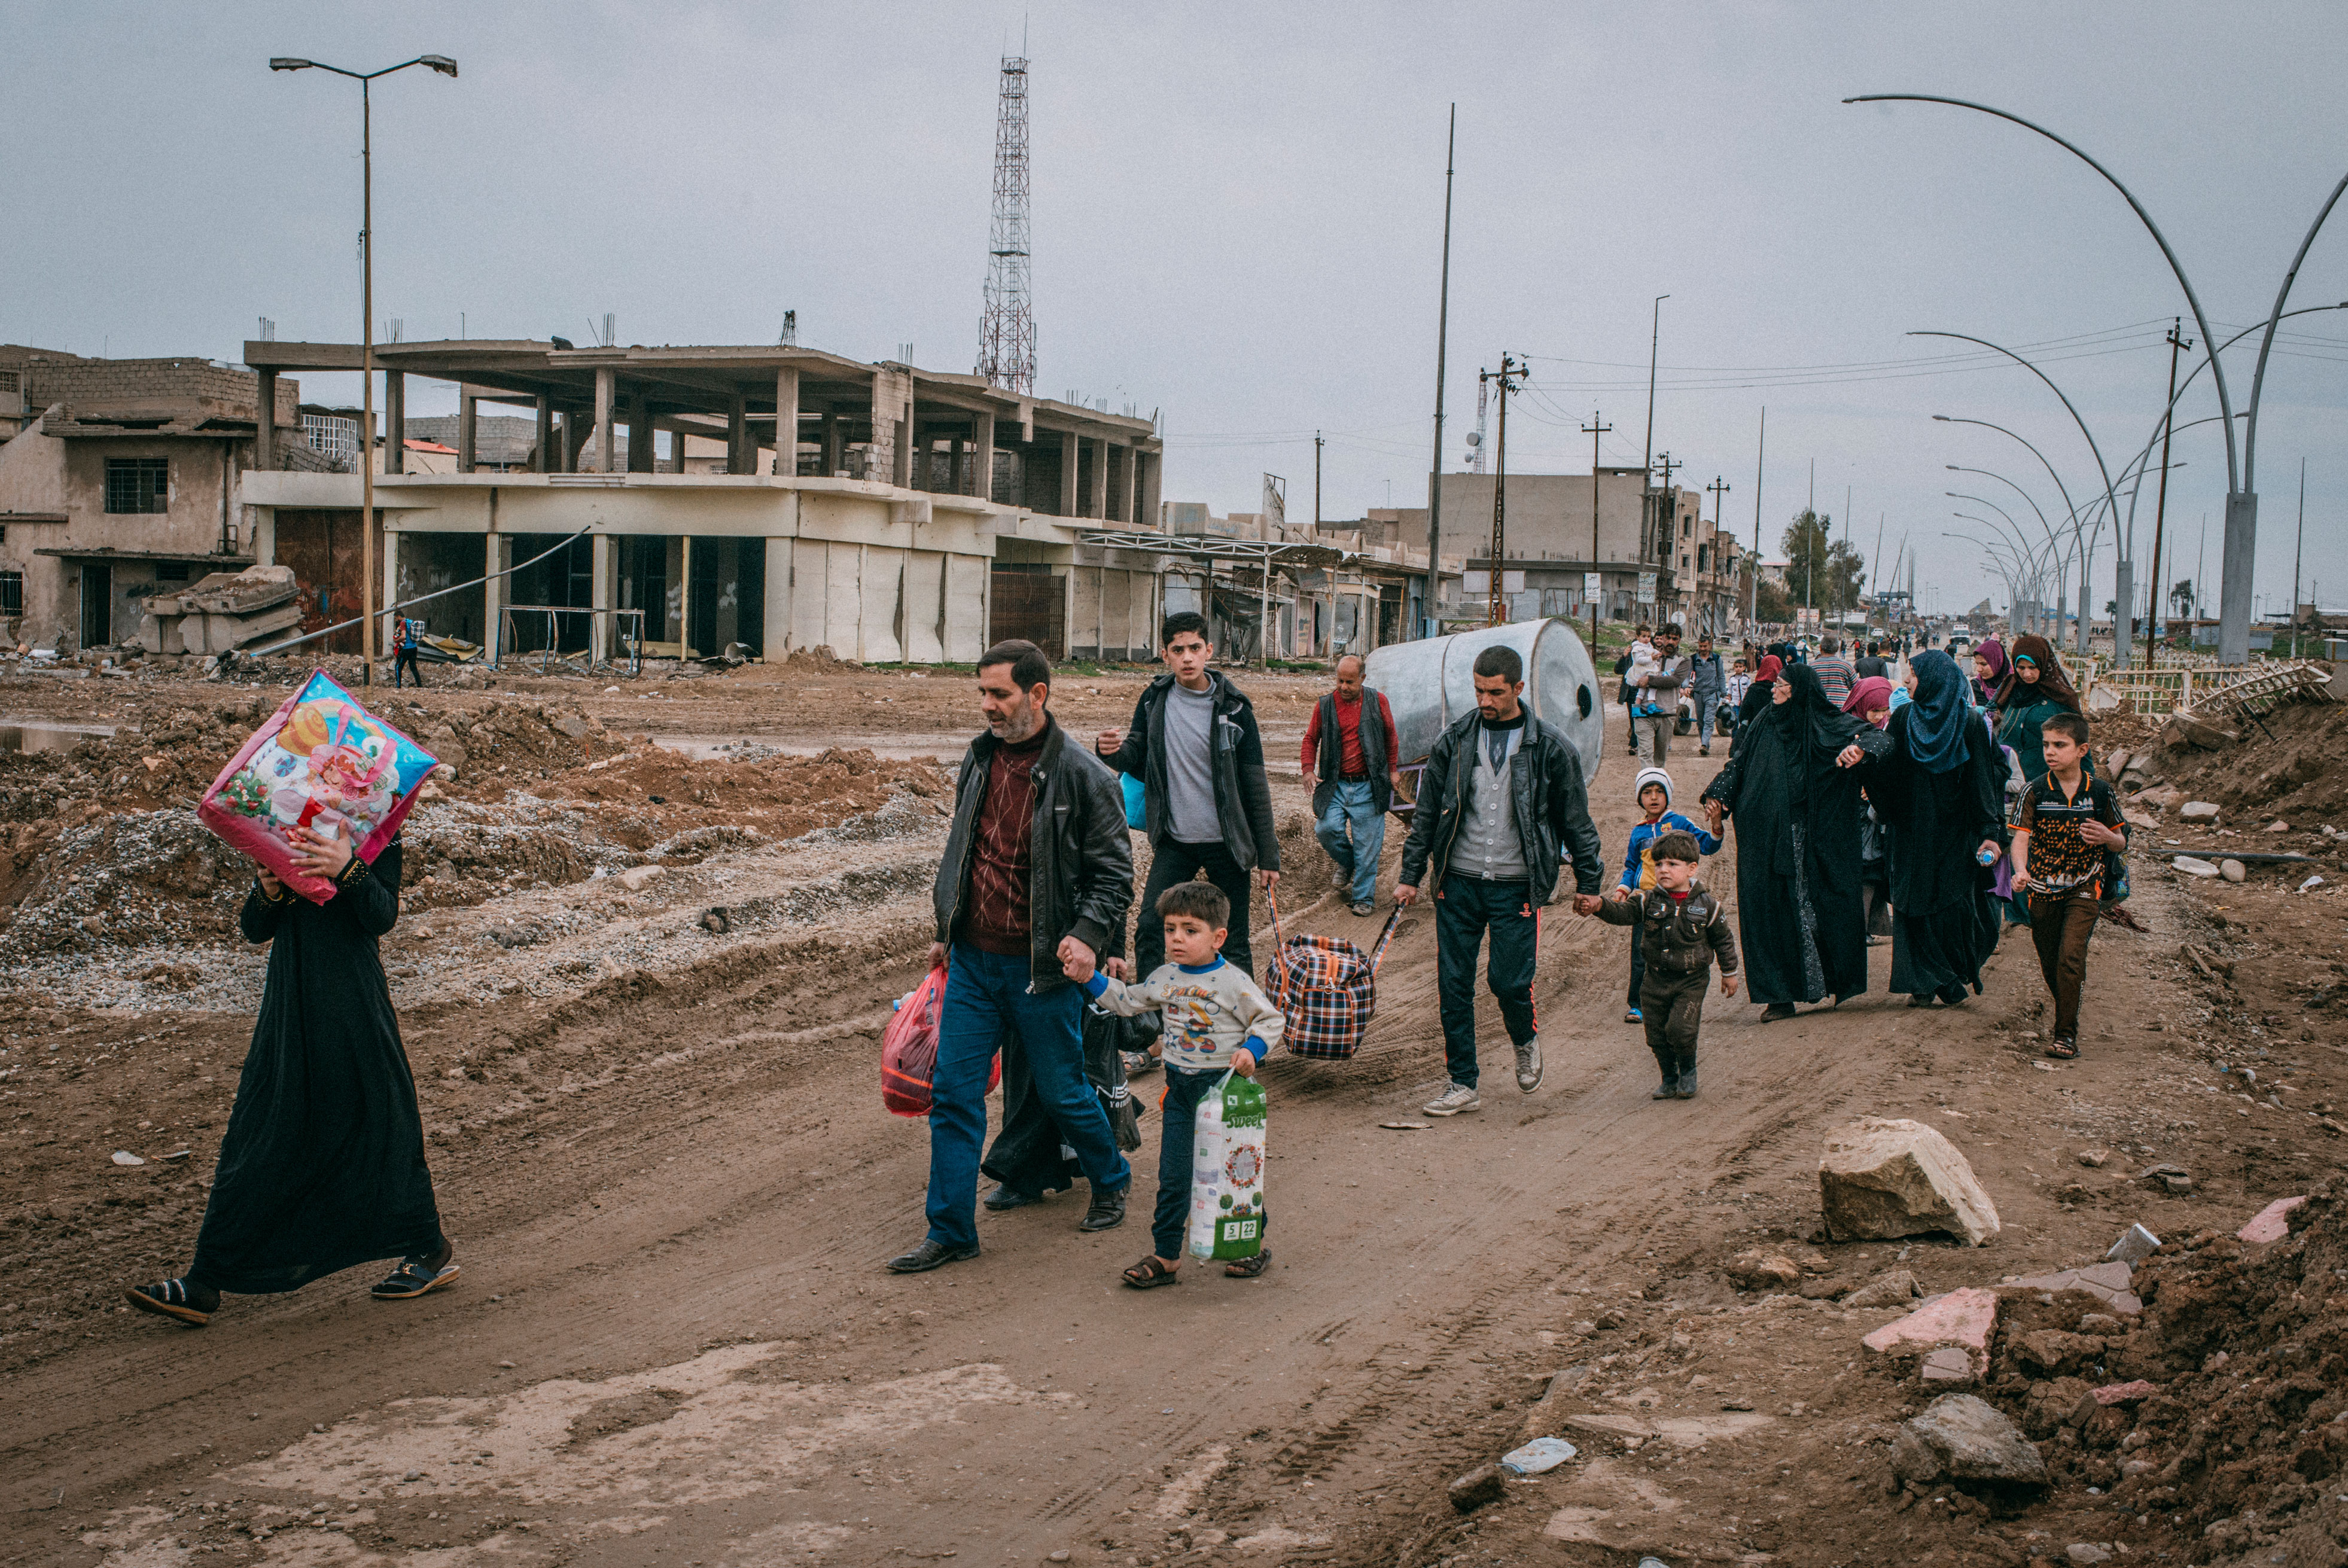 Civilians walk in Baghdad road to go back to their homes after their neighborhood has been liberated, in southwest Mosul. (Emanuele Satolli for TIME)